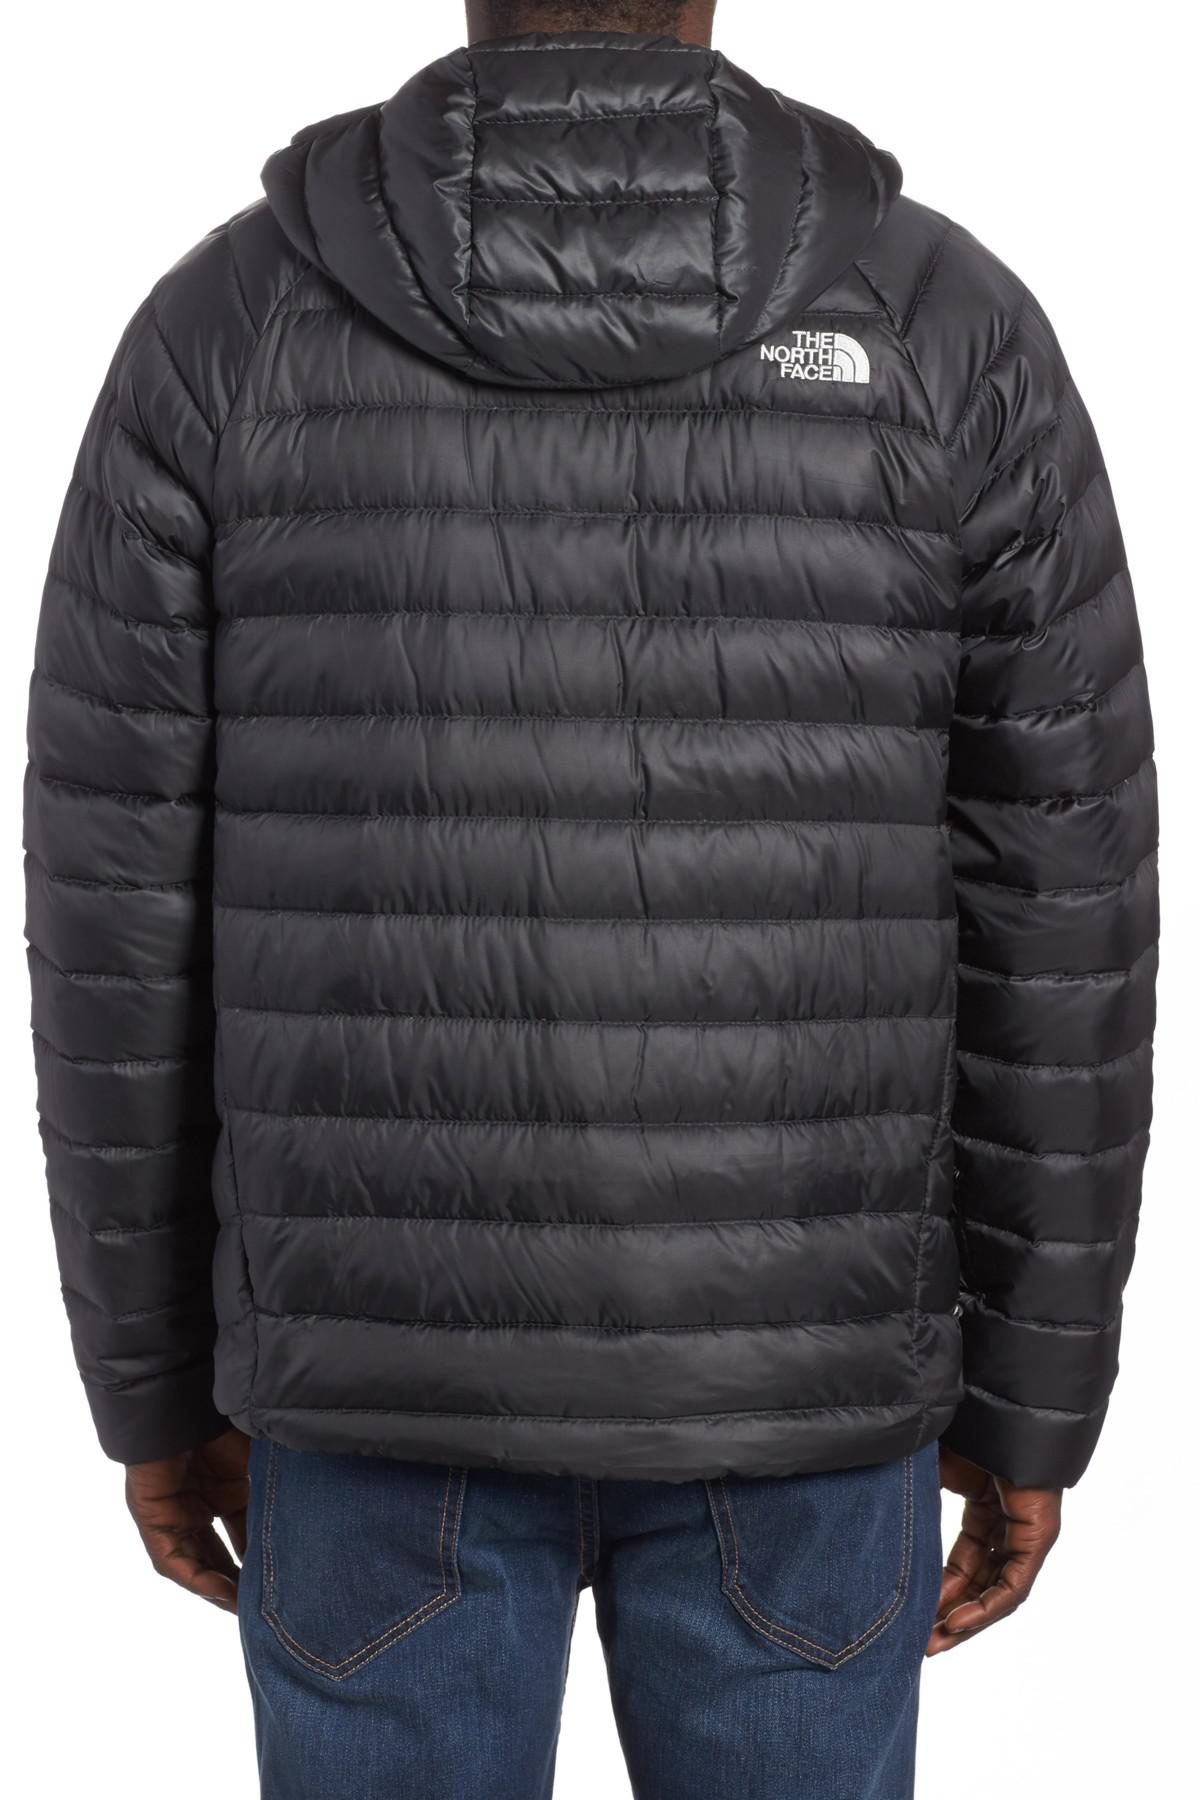 The North Face 800 Fill Down Poland, SAVE 42% - jaynjazz.com